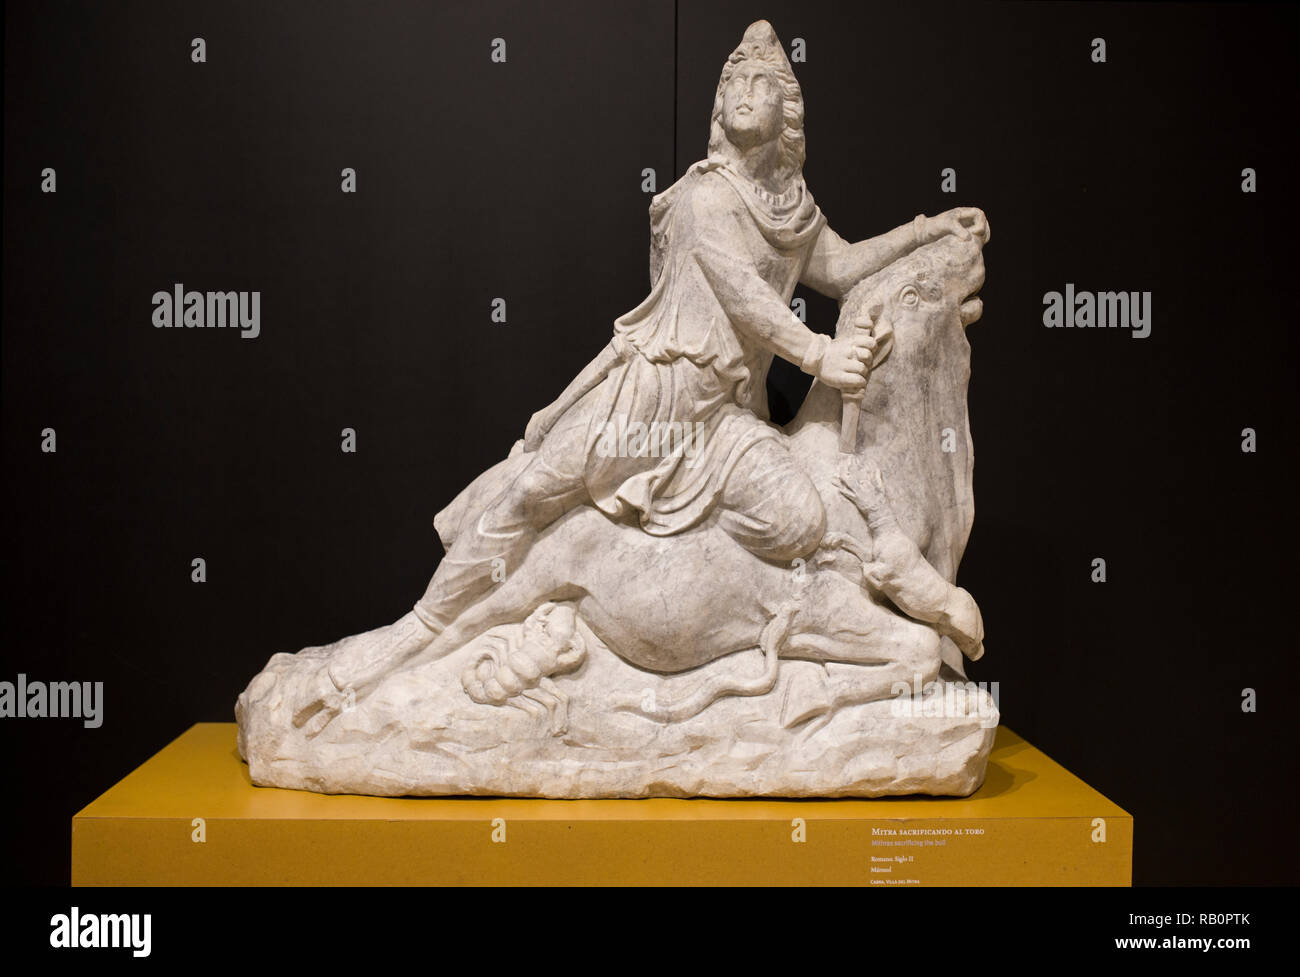 Cordoba, Spain - Sept 8th, 2018: Sculpture group of Mithras Tautoktonos from 2nd C. AC. Archaeological Museum of Cordoba, Spain Stock Photo